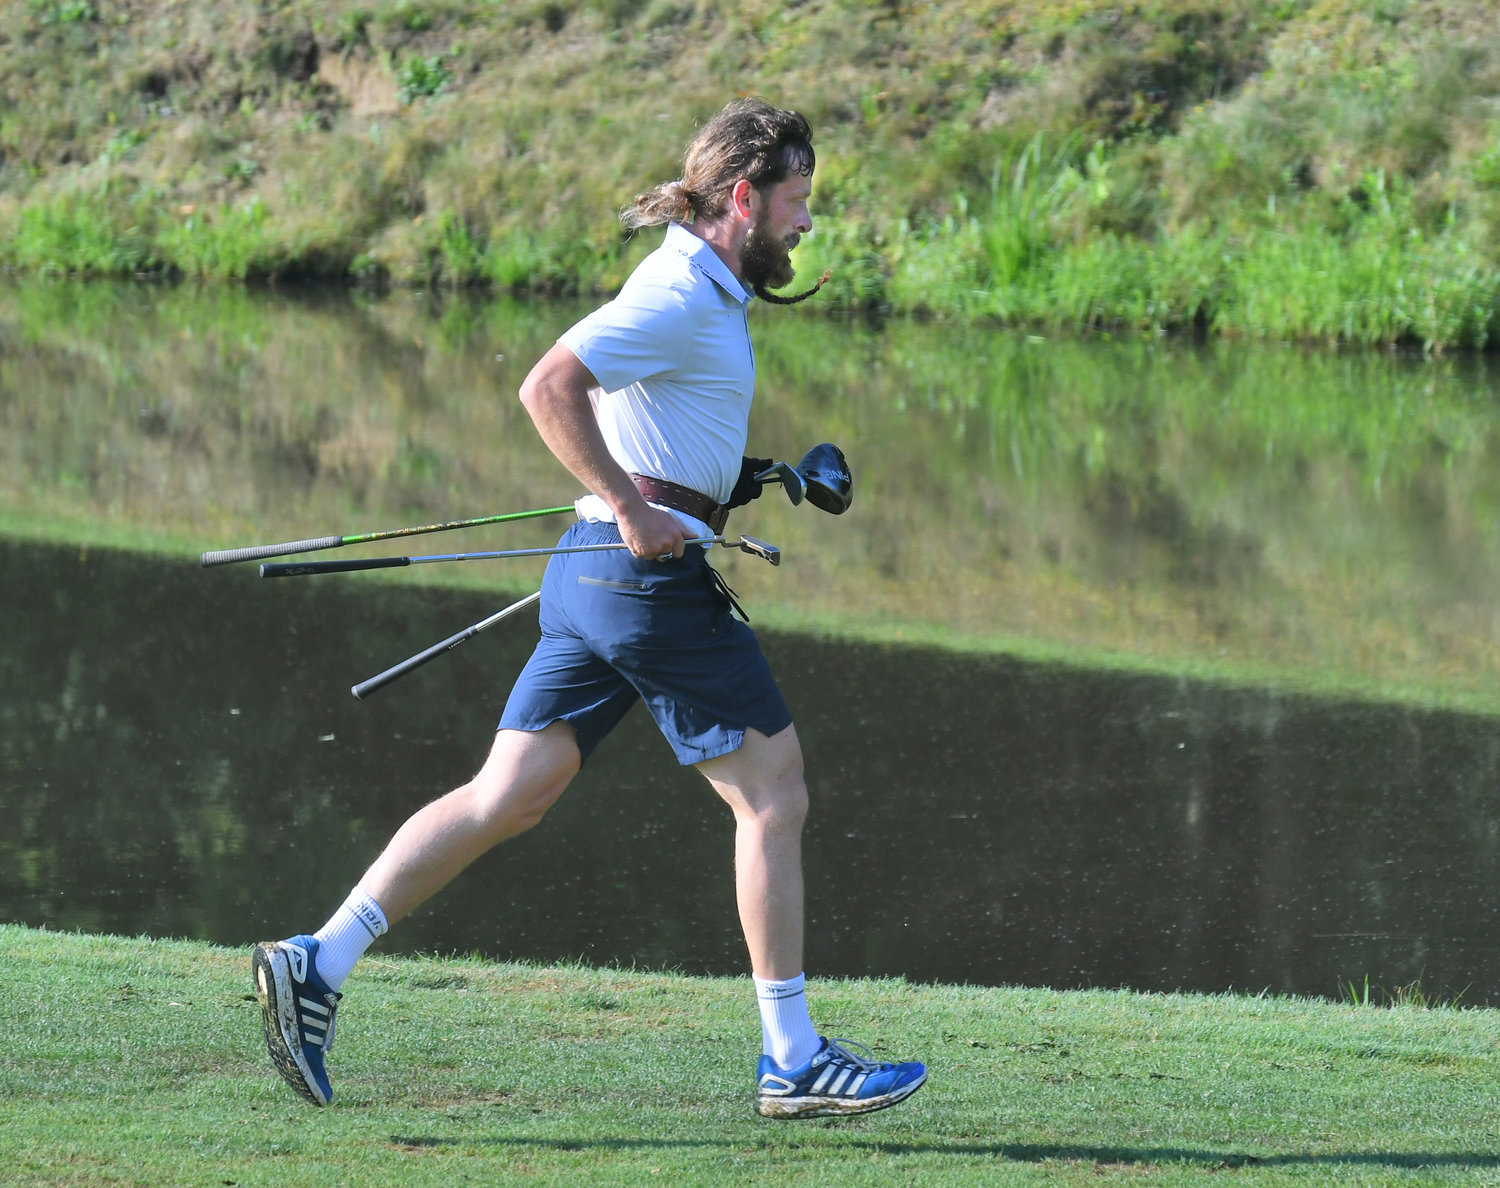 Speedgolfer Rob Hogan from Ireland runs by the seventh hole Monday morning during the New York Speedgolf Open at Rome Country Club. Hogan finished second in the tournament.